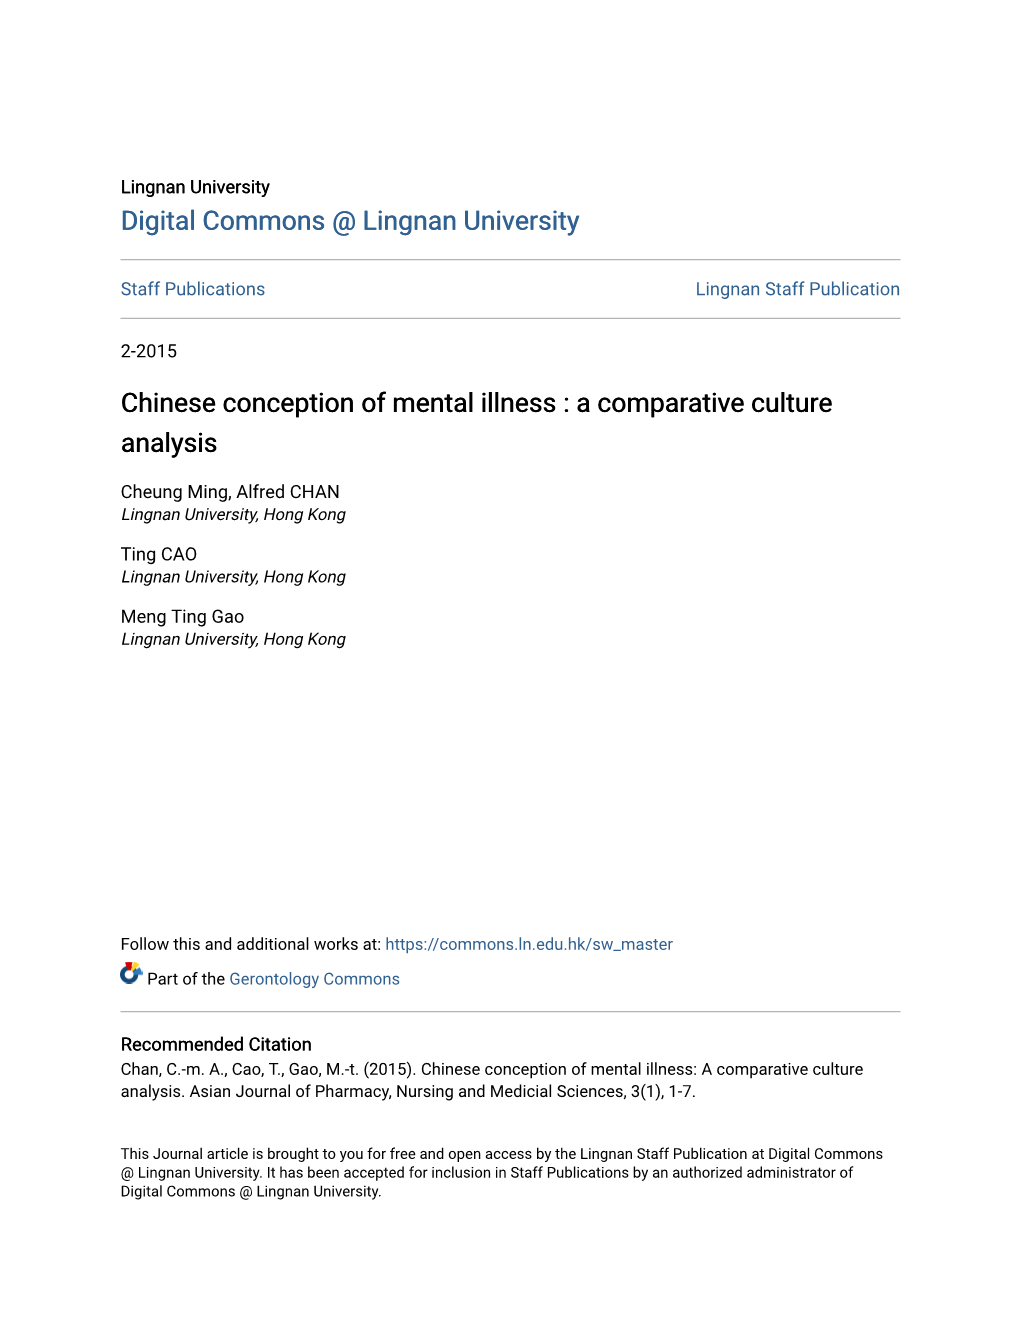 Chinese Conception of Mental Illness : a Comparative Culture Analysis